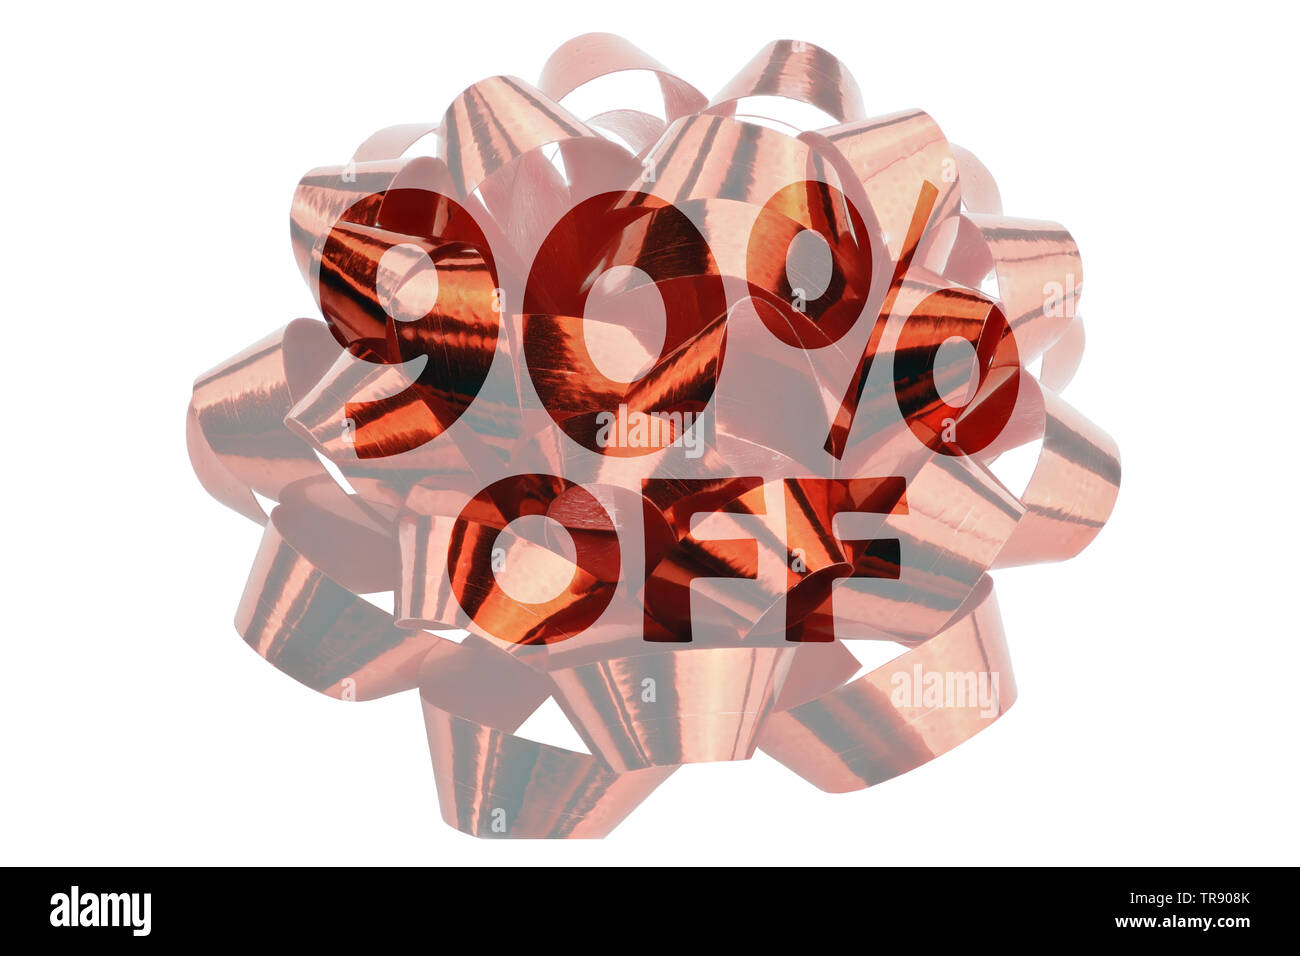 Symbolically highlighted text 90% off against the background of a red gift loop Stock Photo